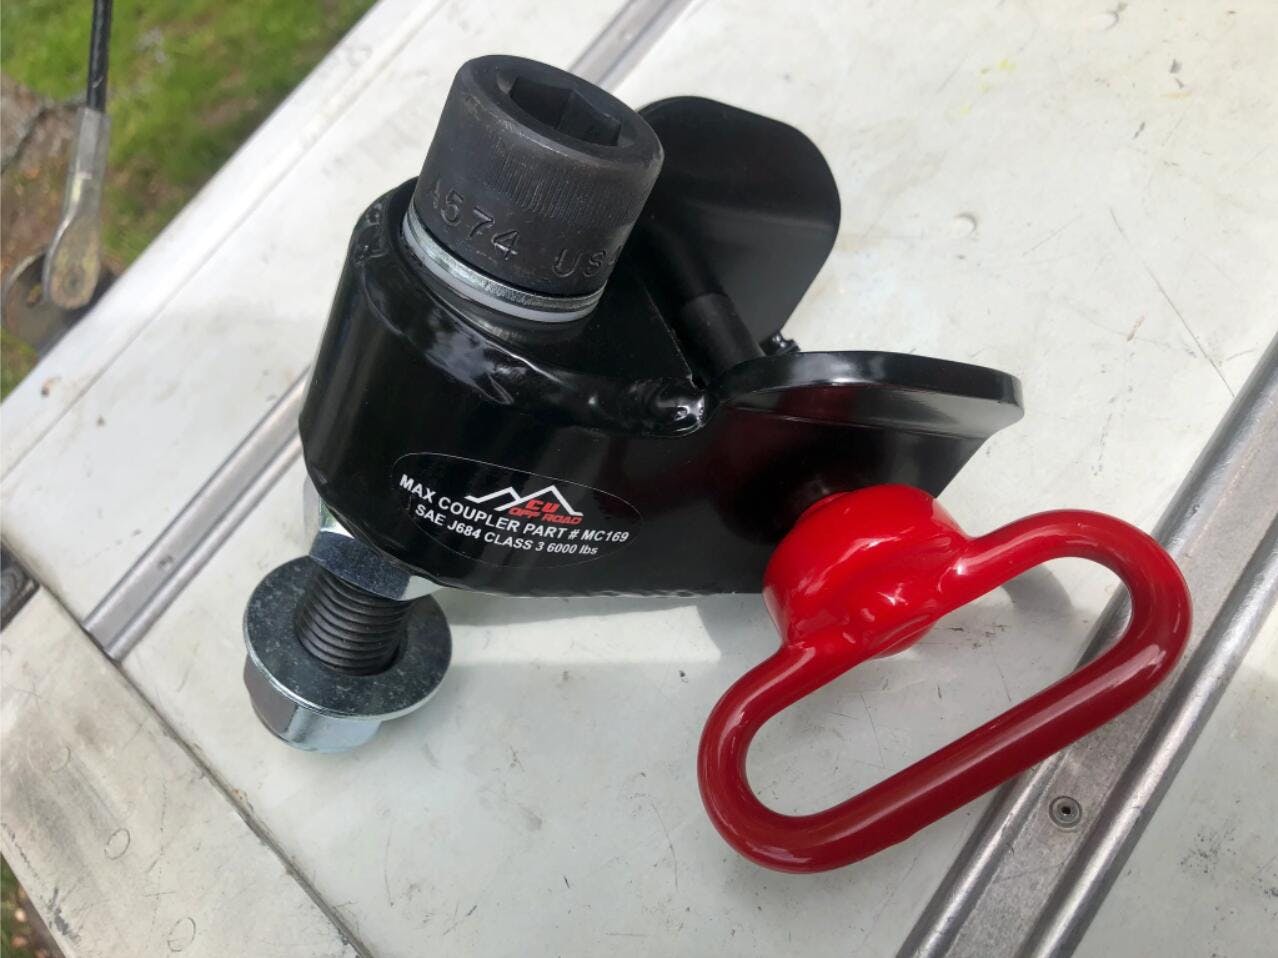 The receiving end of a maxx coupler articulating hitch with a red pin.